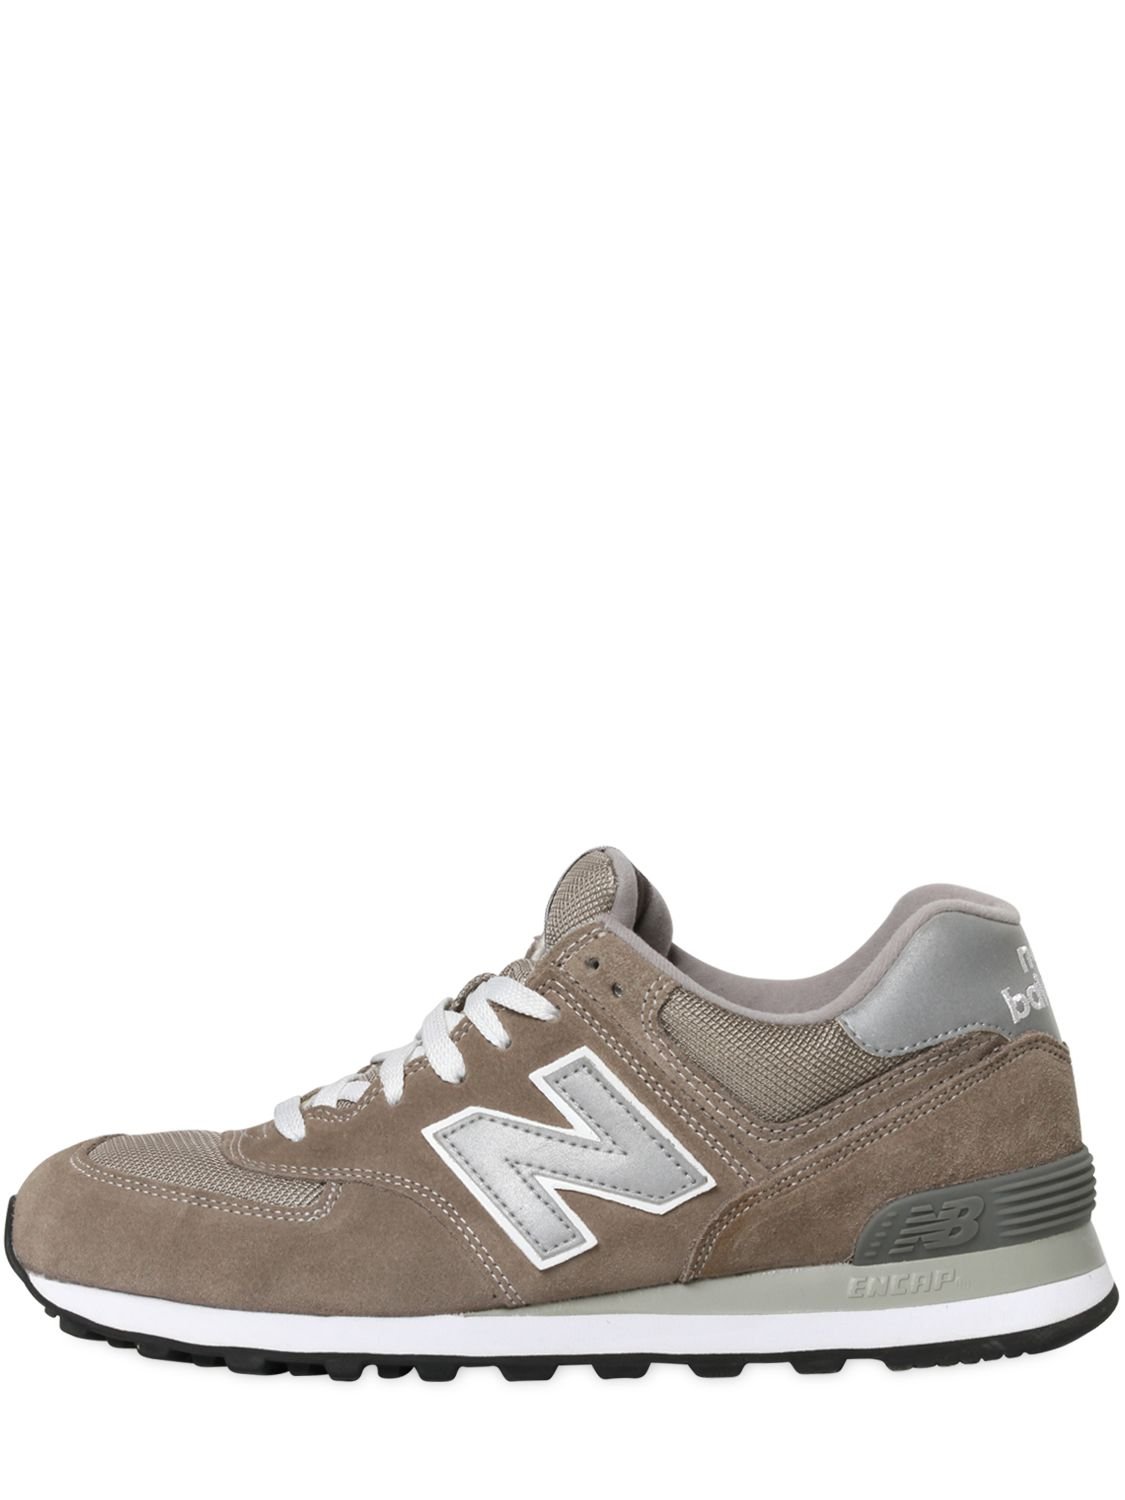 Lyst - New Balance 574 Mesh & Suede Sneakers in Brown for Men